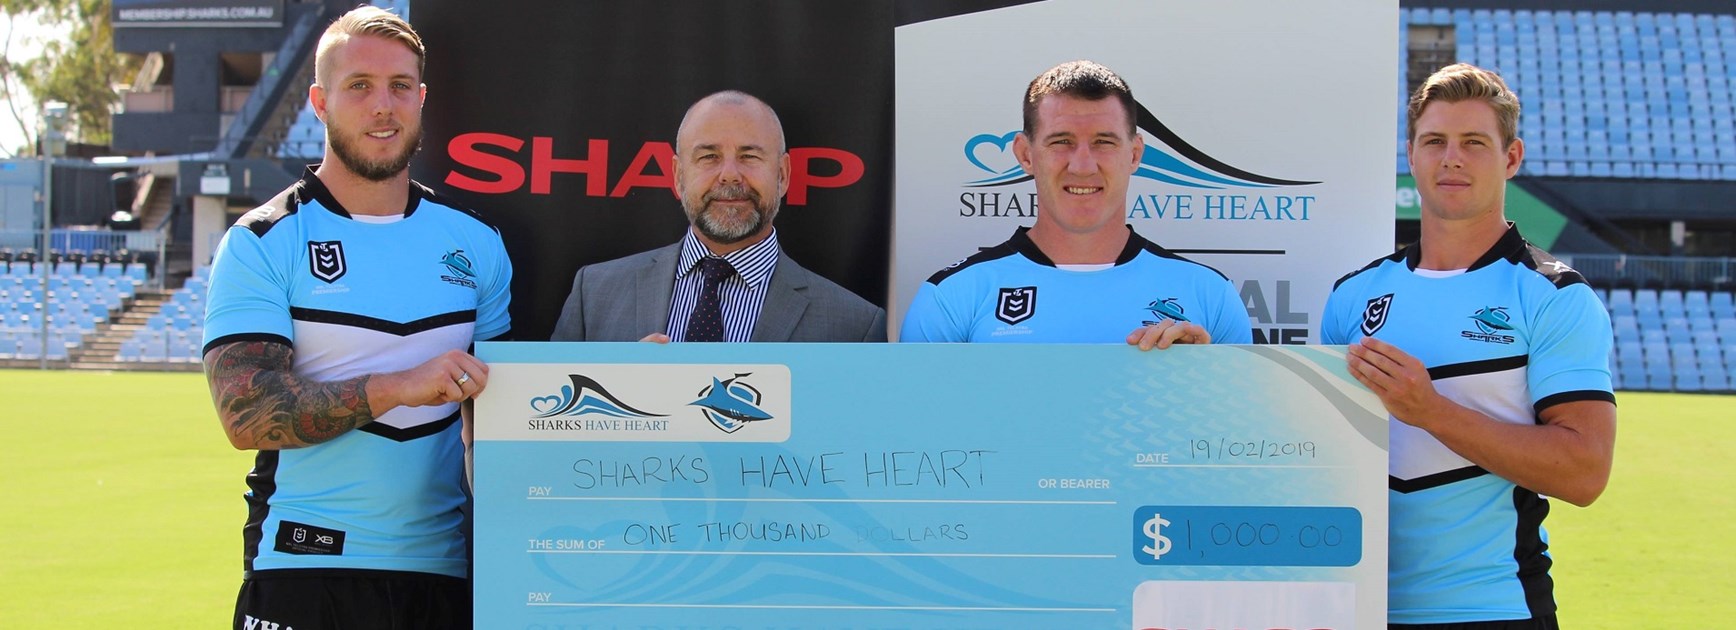 Fundraise for Sharks Have Heart